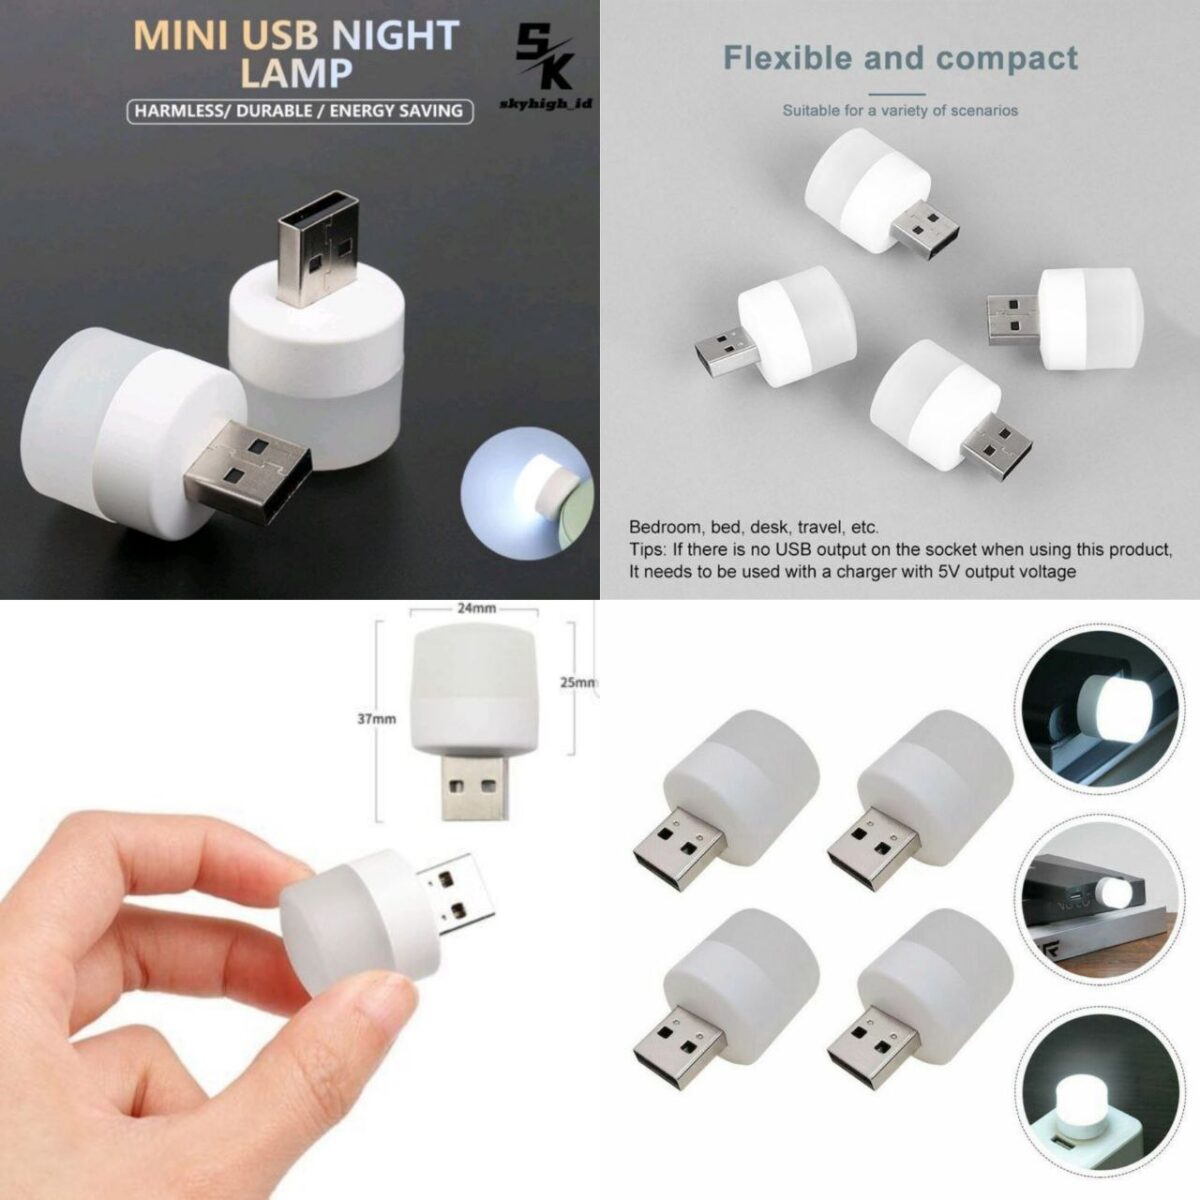 These mini USB bulbs are compact in size, making them easy to carry and perfect for on-the-go lighting. Ideal for camping trips, power outages, or any situation where you need a quick and portable light source.